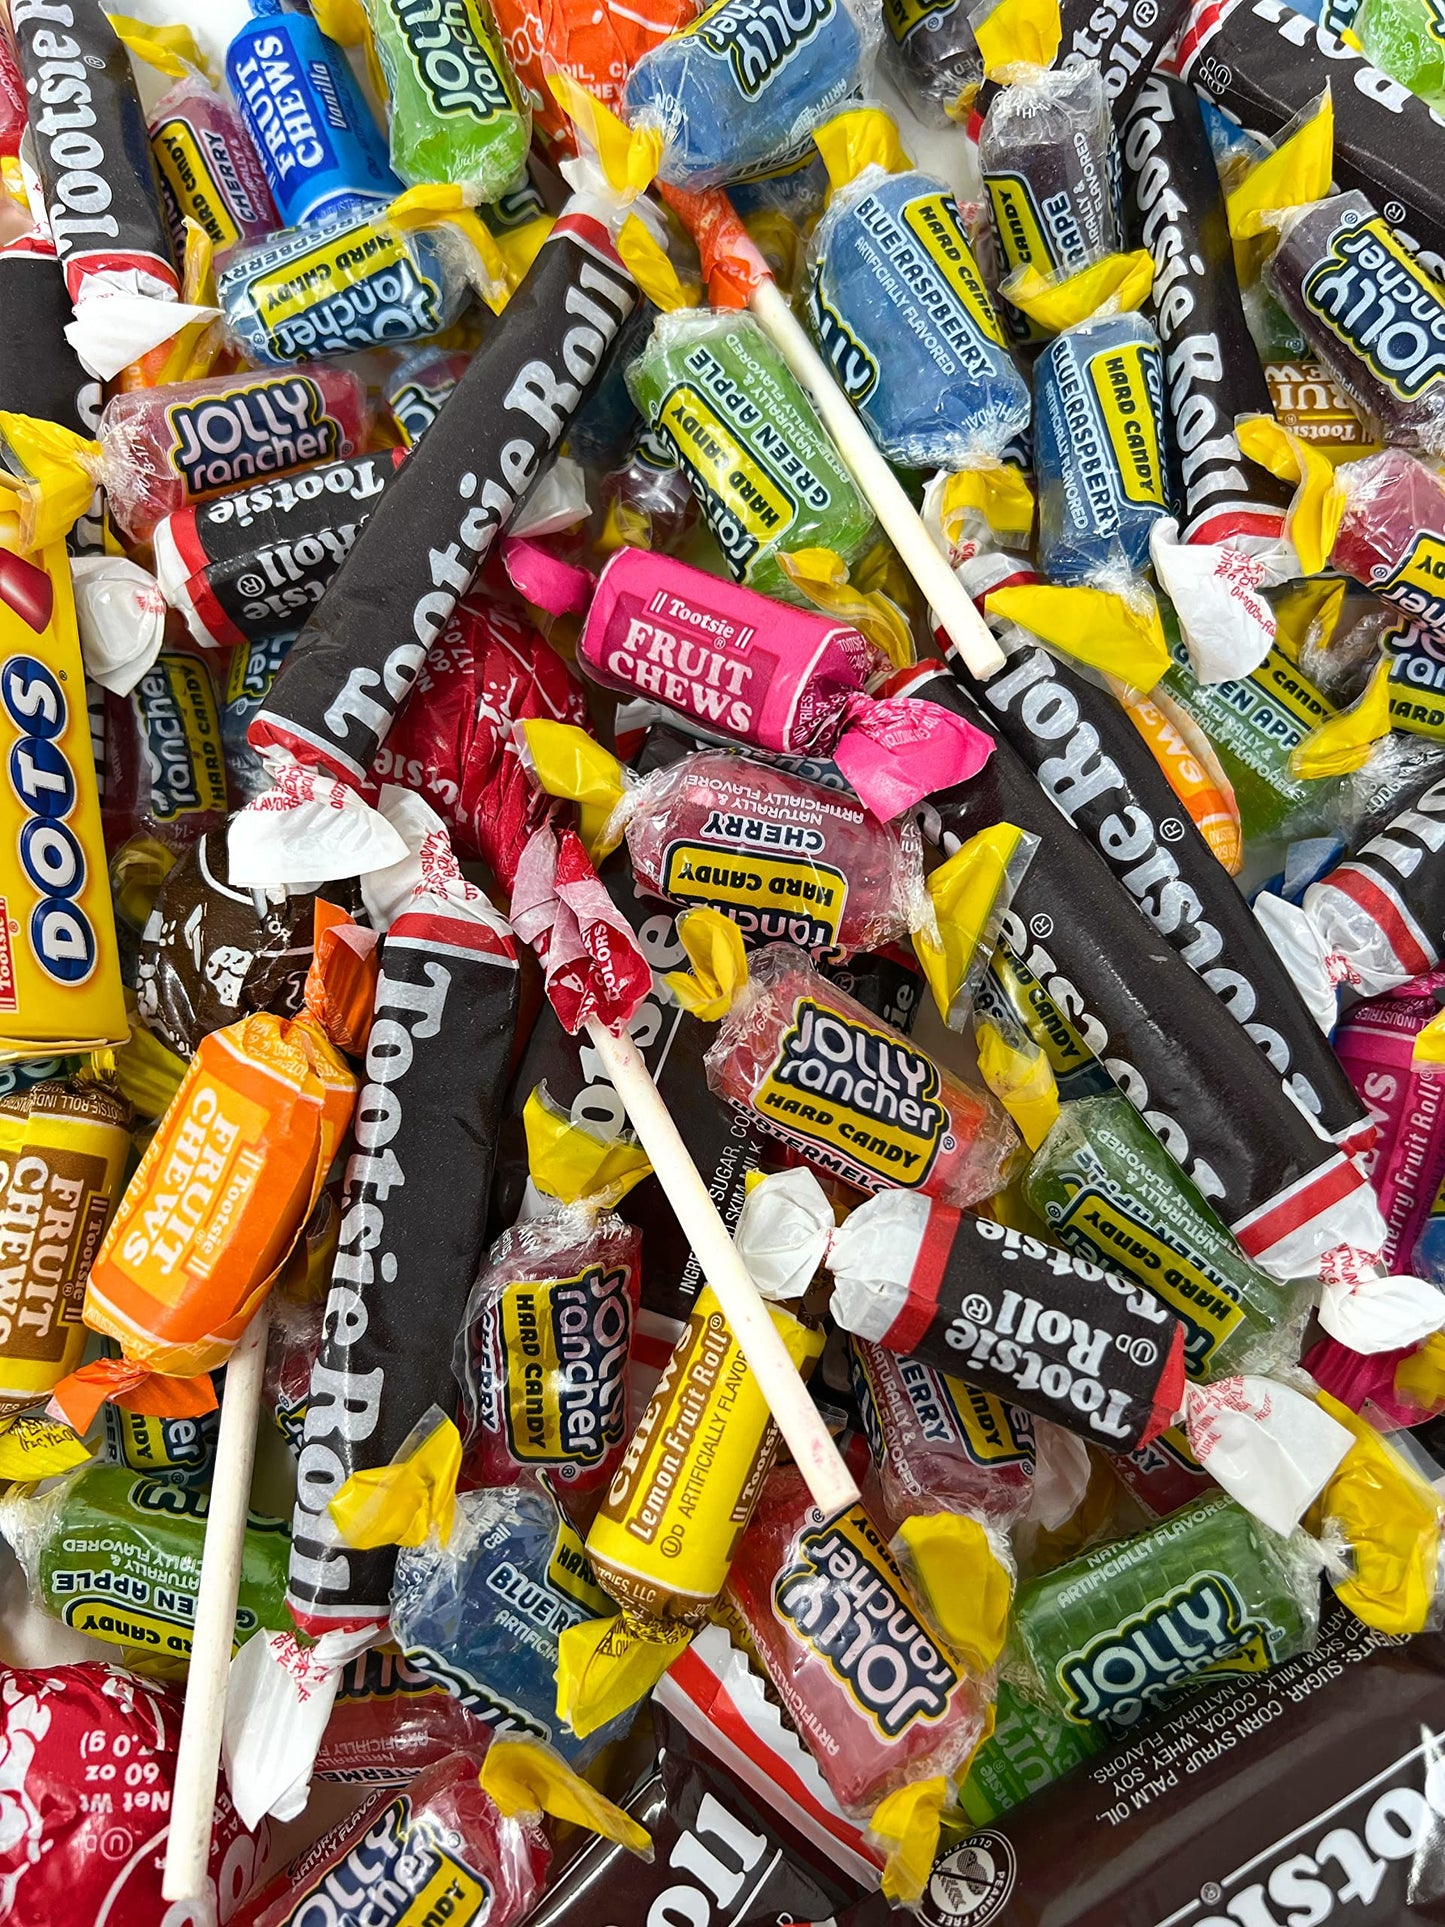 Assorted Bulk American Candy 2 Lb Jolly Rancher Hard Candy Mix and Tootsie Rolls Juniors Tootsie Snack Bars Tootsie Mini Dots Tootsie Pops Fruit Rolls 100+ Ct (32 Oz)